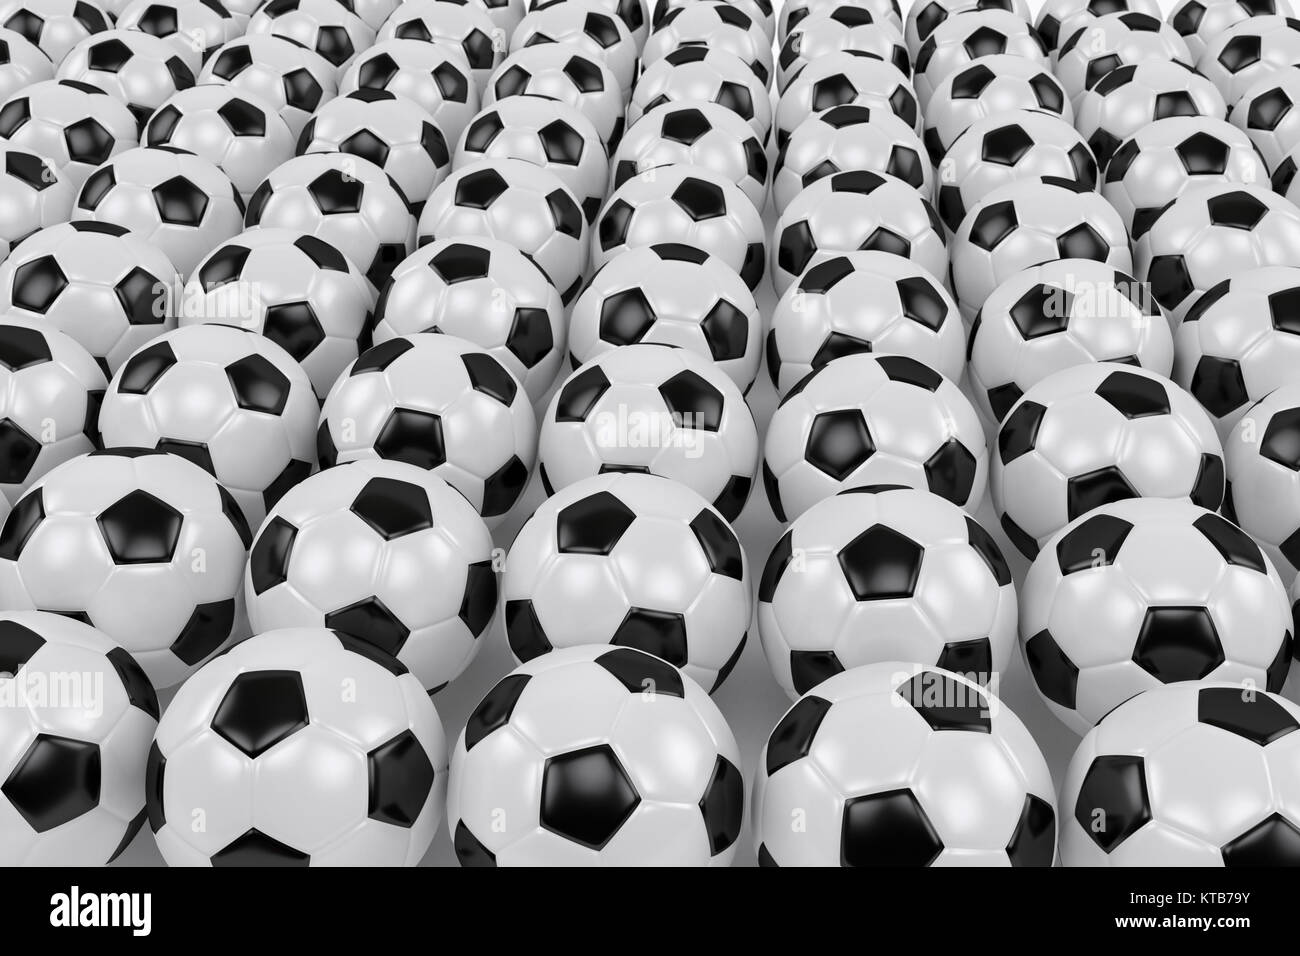 many soccer balls arranged in rows in the perspective view, 3d ...